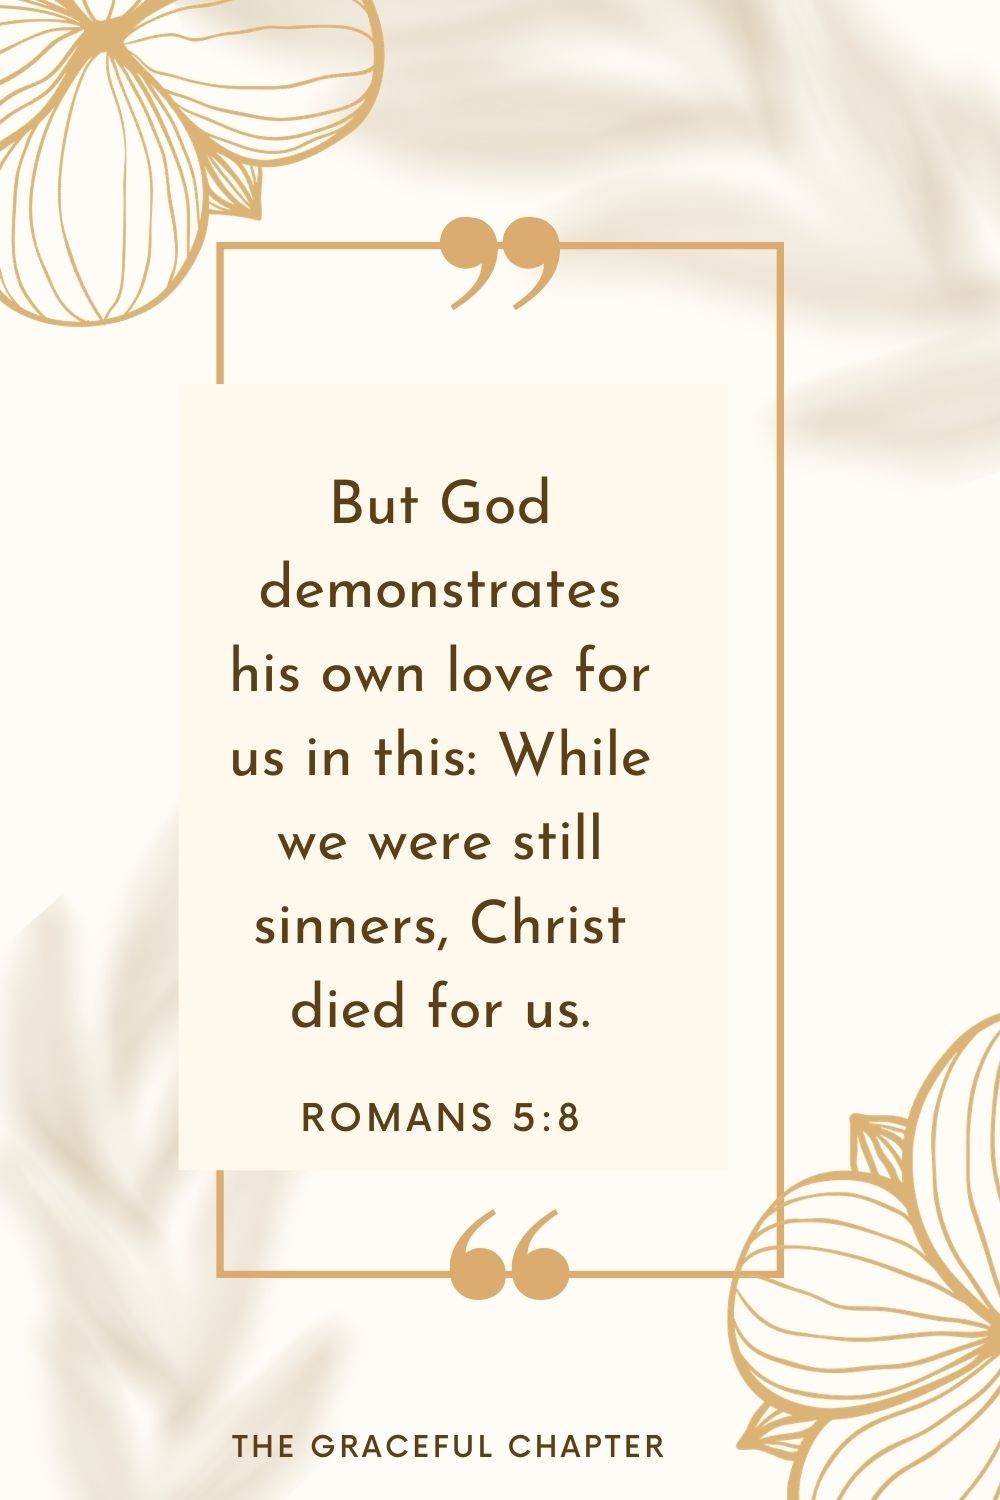 But God demonstrates his own love for us in this: While we were still sinners, Christ died for us. Romans 5:8